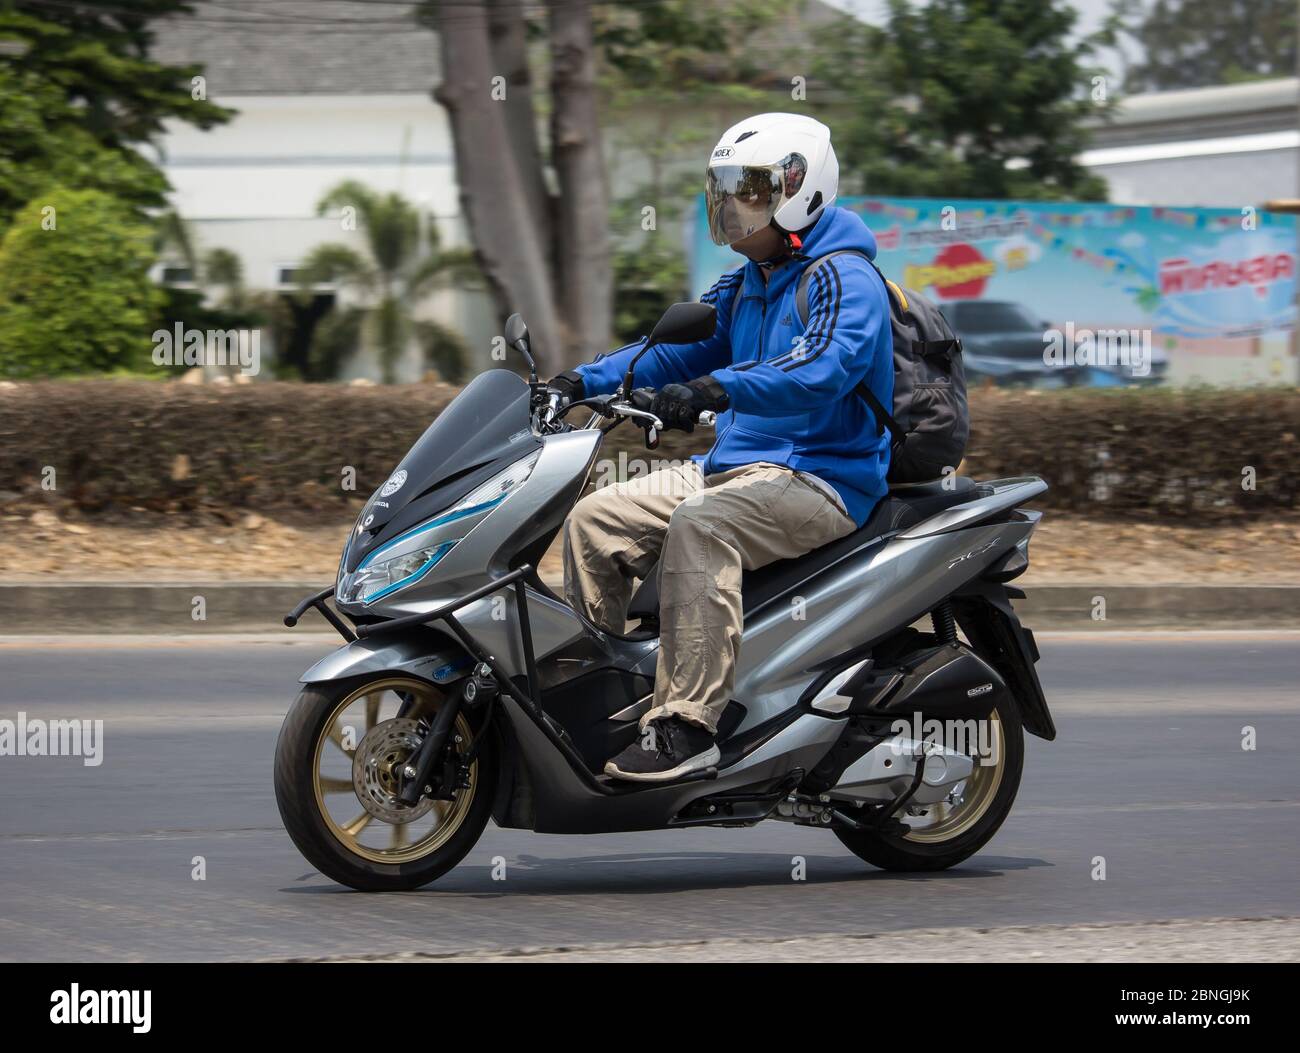 Chiangmai, Thailand - April 14 2020: Man and Private Honda Motorcycle, PCX  150. On road no.1001, 8 km from Chiangmai Business Area Stock Photo - Alamy